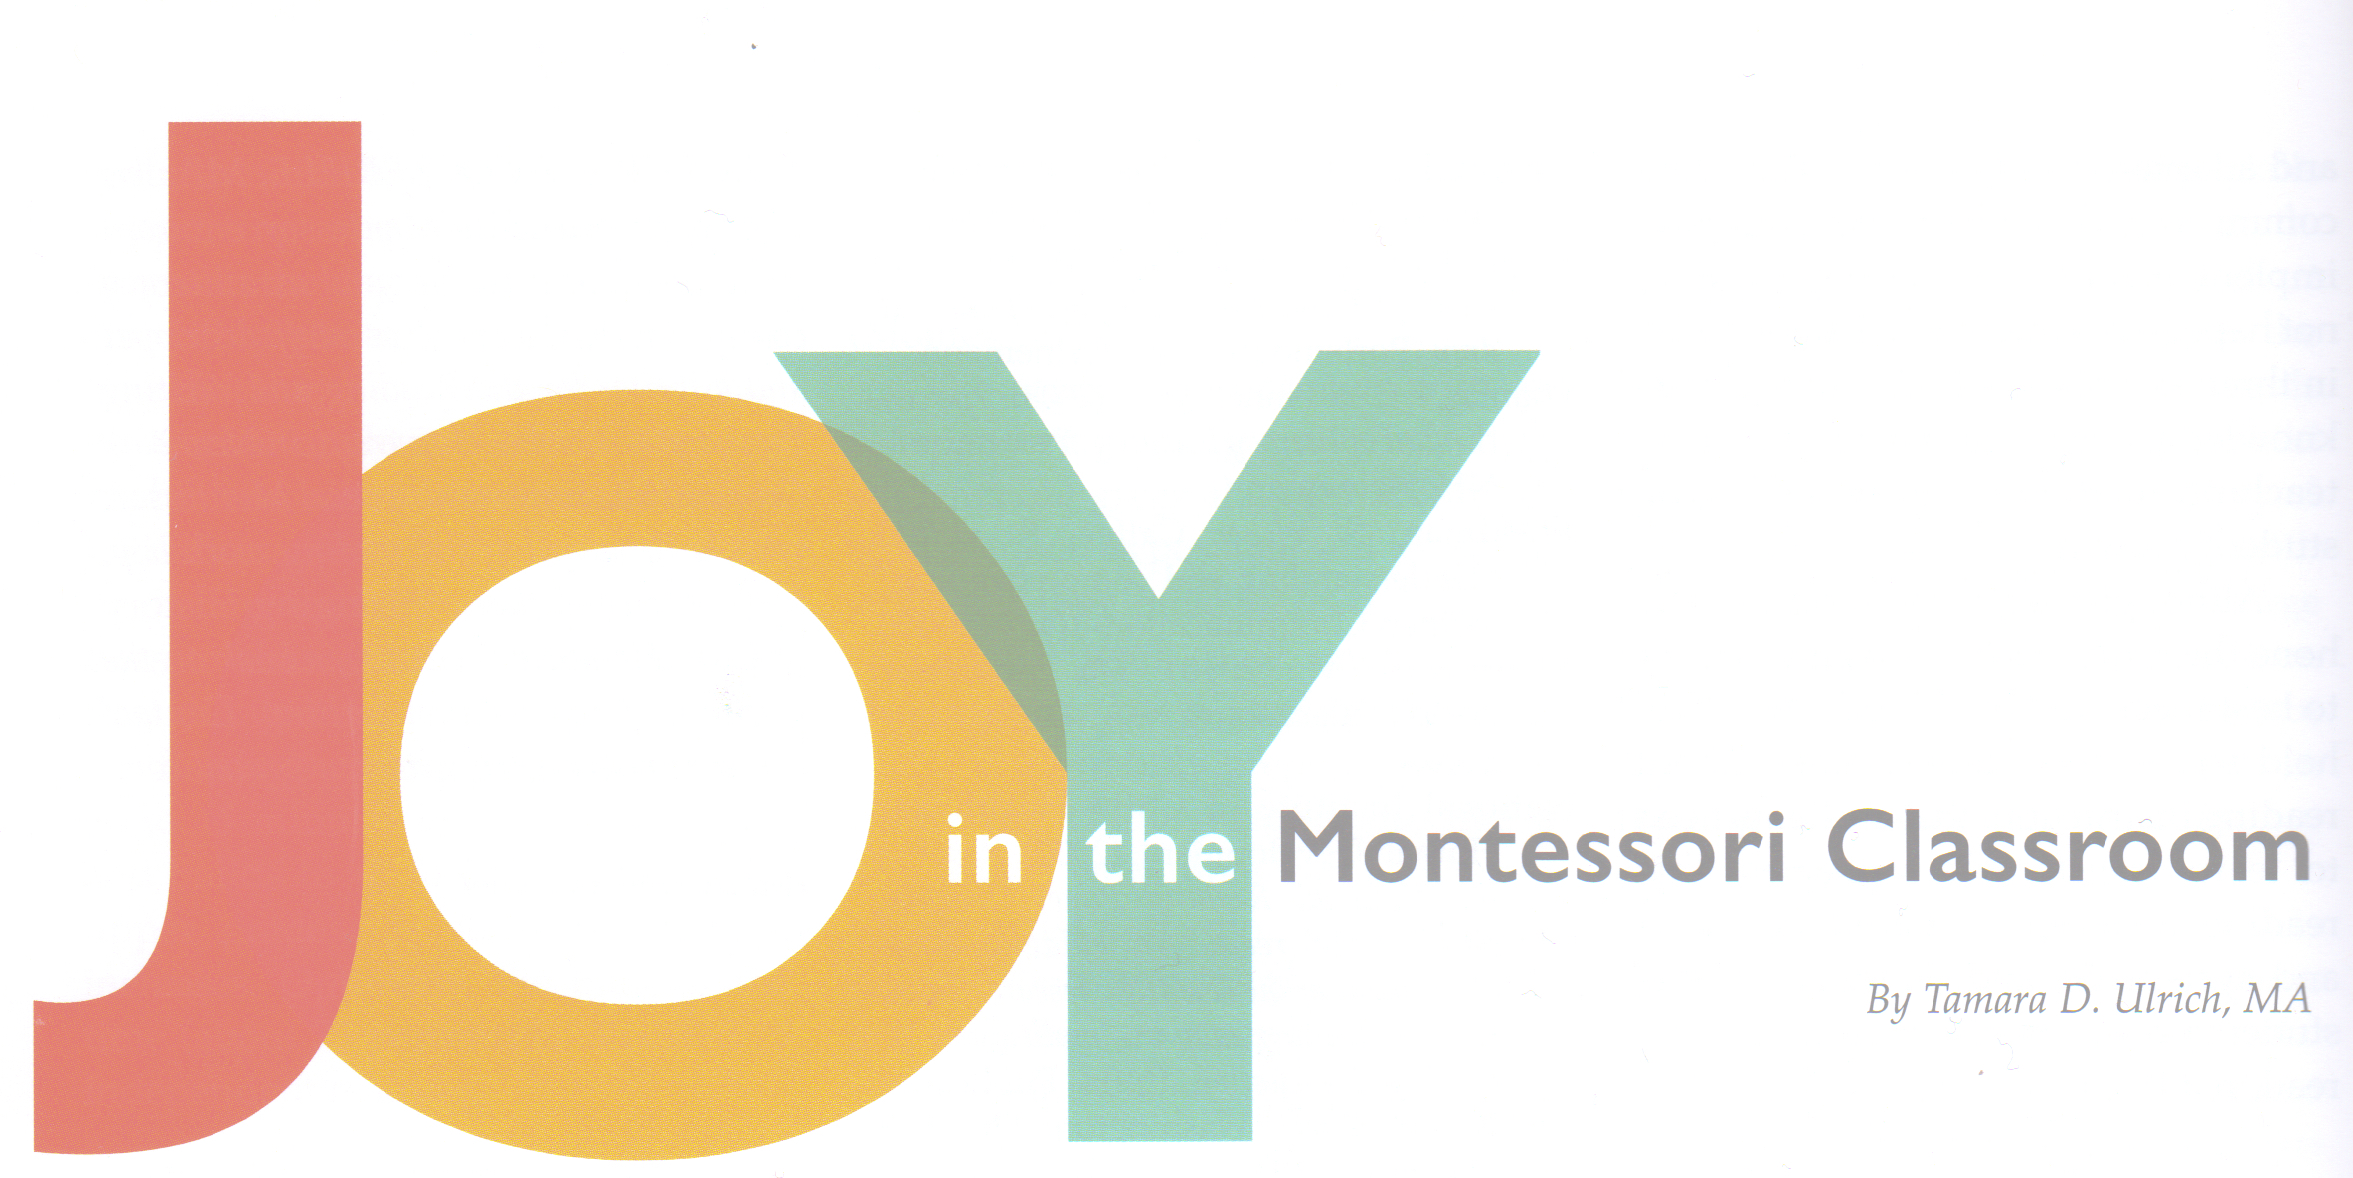 The words "Joy in the Montessori Classroom" by Tamara D Ulrich, MA